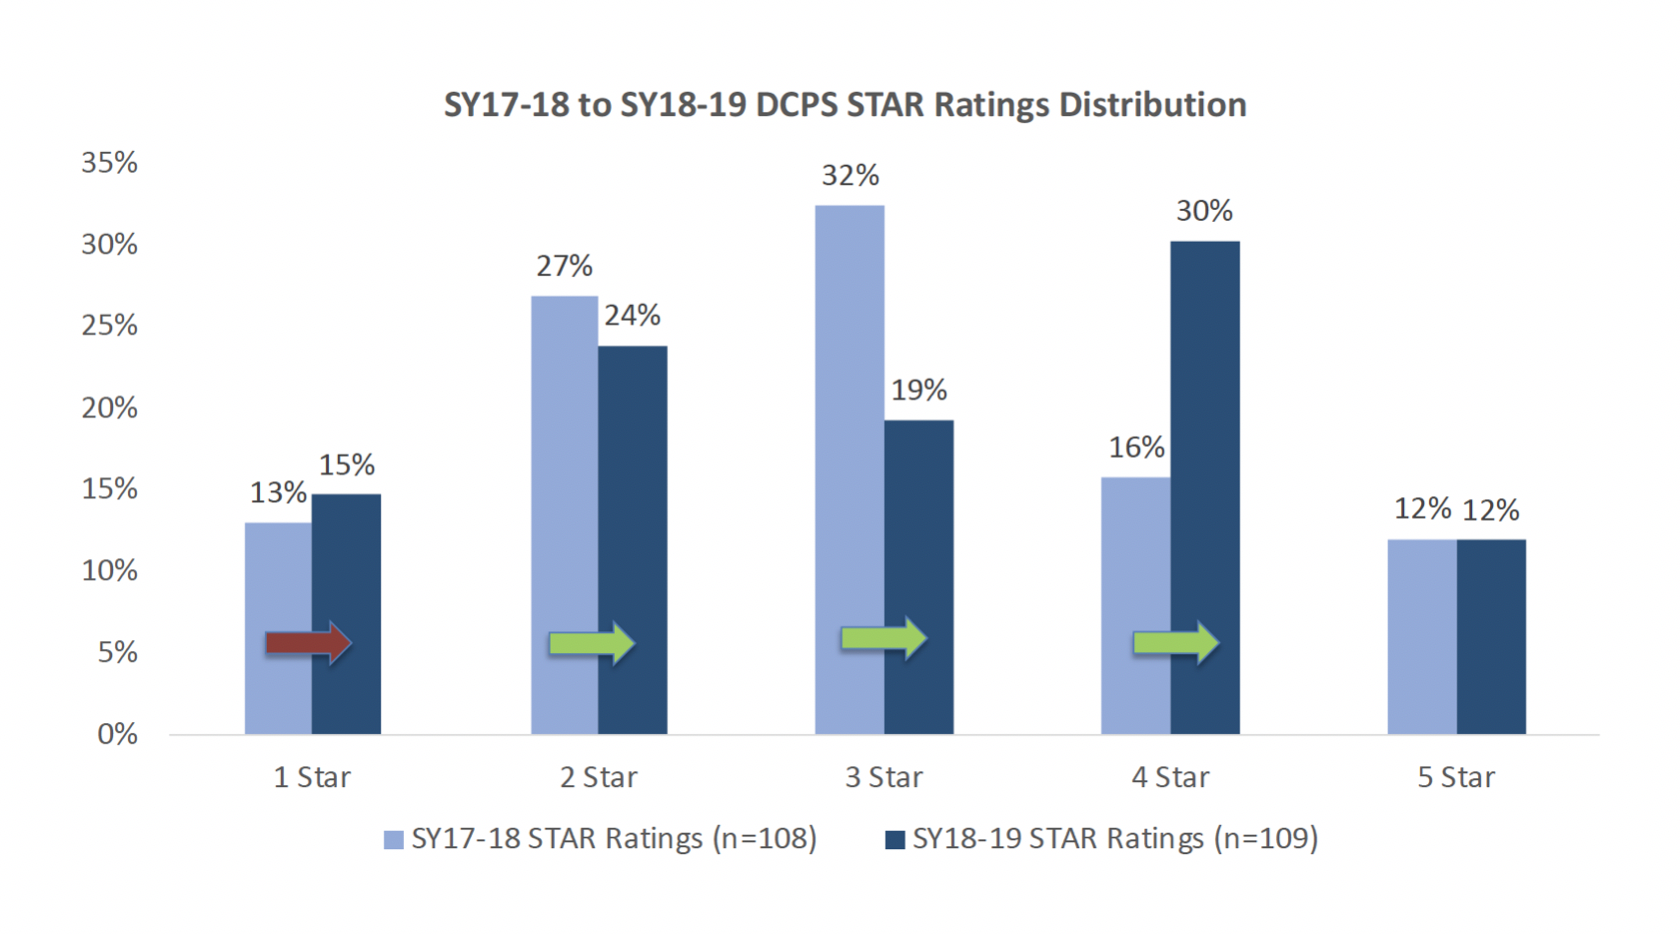 SY17-18 to SY18-19 DCPS STAR Ratings Distribution